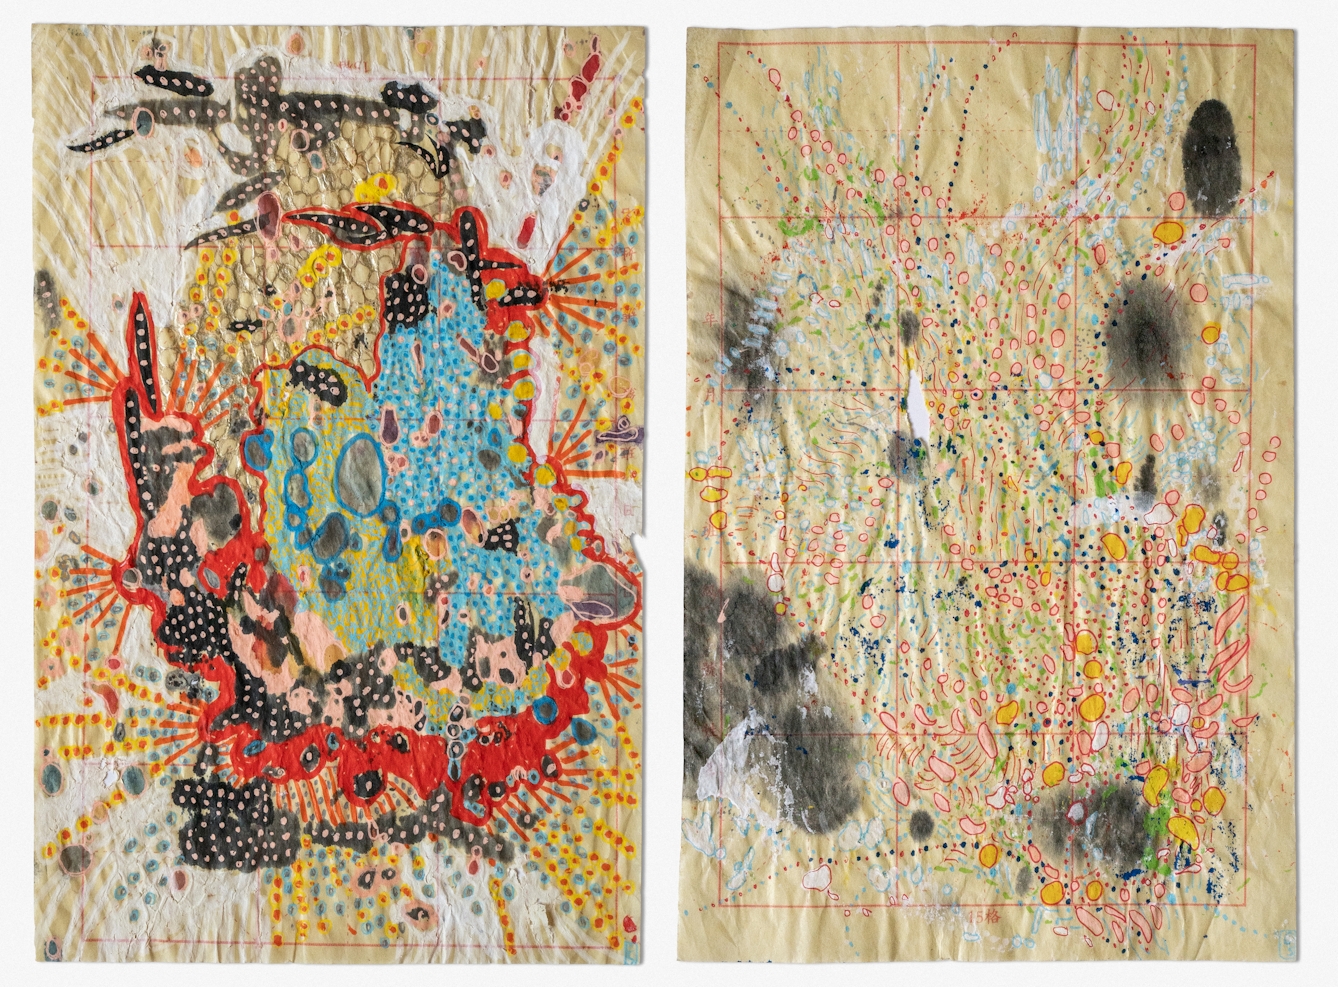 Photographic diptych of two abstract drawings on pink gridded Chinese calligraphy paper that is slightly crumpled and folded. To the left is an abstract mass of colourful splodges and very densely packed dots of different sizes and colours. The mass is surrounded by a broken red line, with a number of straight dotted lines in red and yellow extending out from it at different points. There are a number of black splodges with white dots inside them. Surrounding the red outline is a broken border of white ink, with lines extending from it out to the edge of the page. On the right is a collection of tiny circles, the majority of which are red-pink whilst some are dark navy blue. The circles range in size, and some of the larger circles are filled in yellow, whilst the smaller ones are just lines of alternating colour dots. A number of dark grey, fingerprint shaped splodges appear over the mass of dots, most of them slightly faded. 